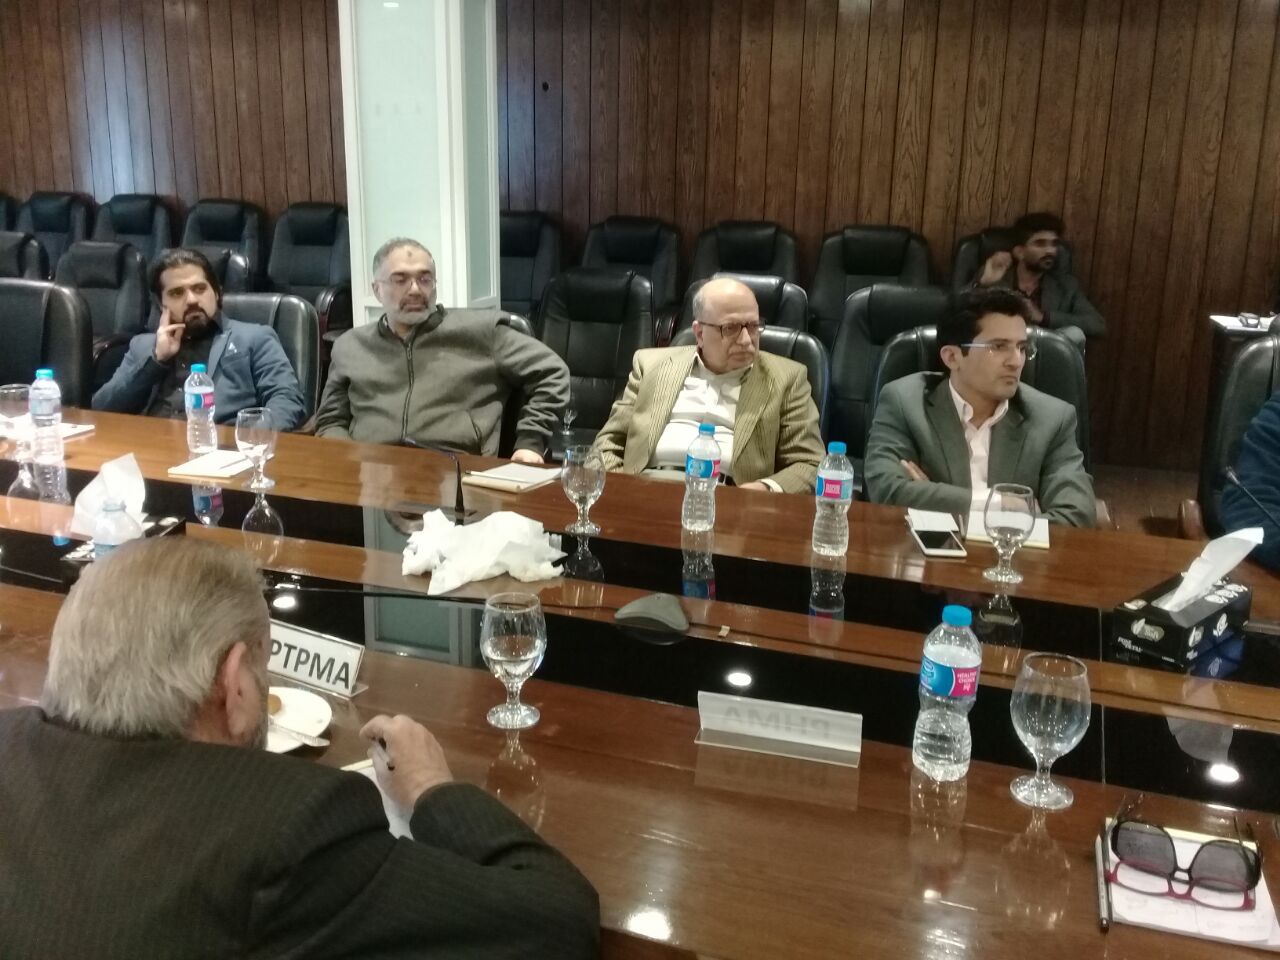 https://aptma.org.pk/wp-content/uploads/2021/10/Joint-Meeting-of-the-Textile-Industry-Associations-15.jpg